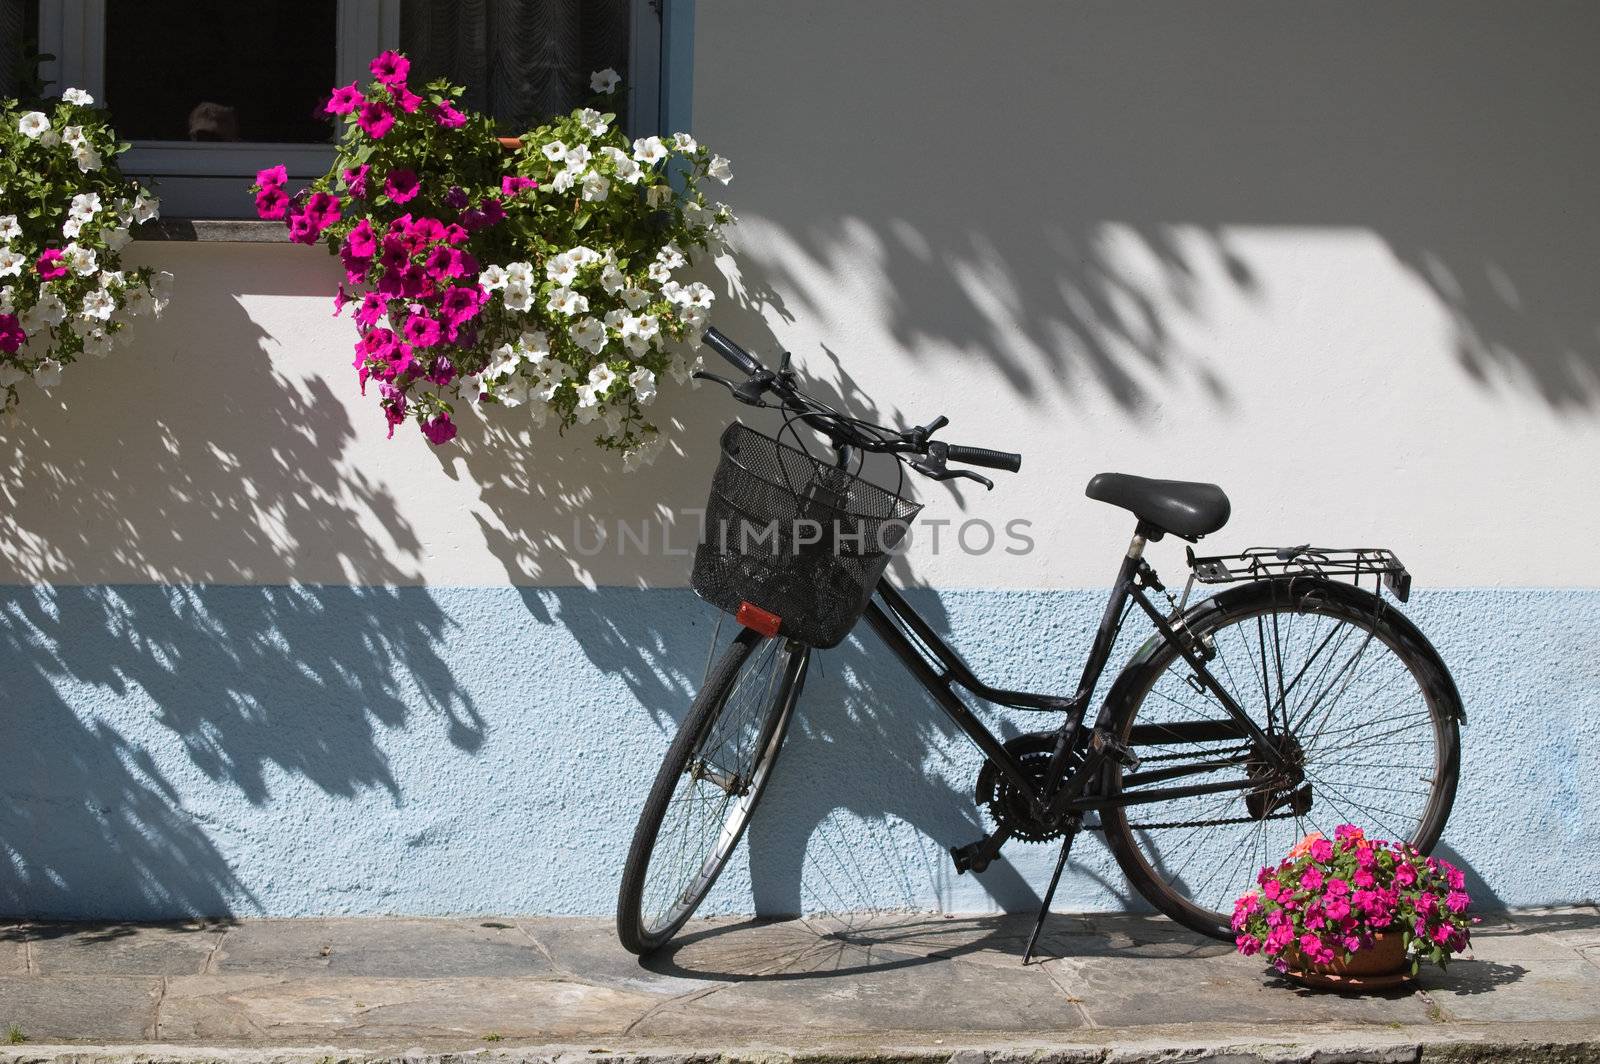 Bicycle with flowers by sil